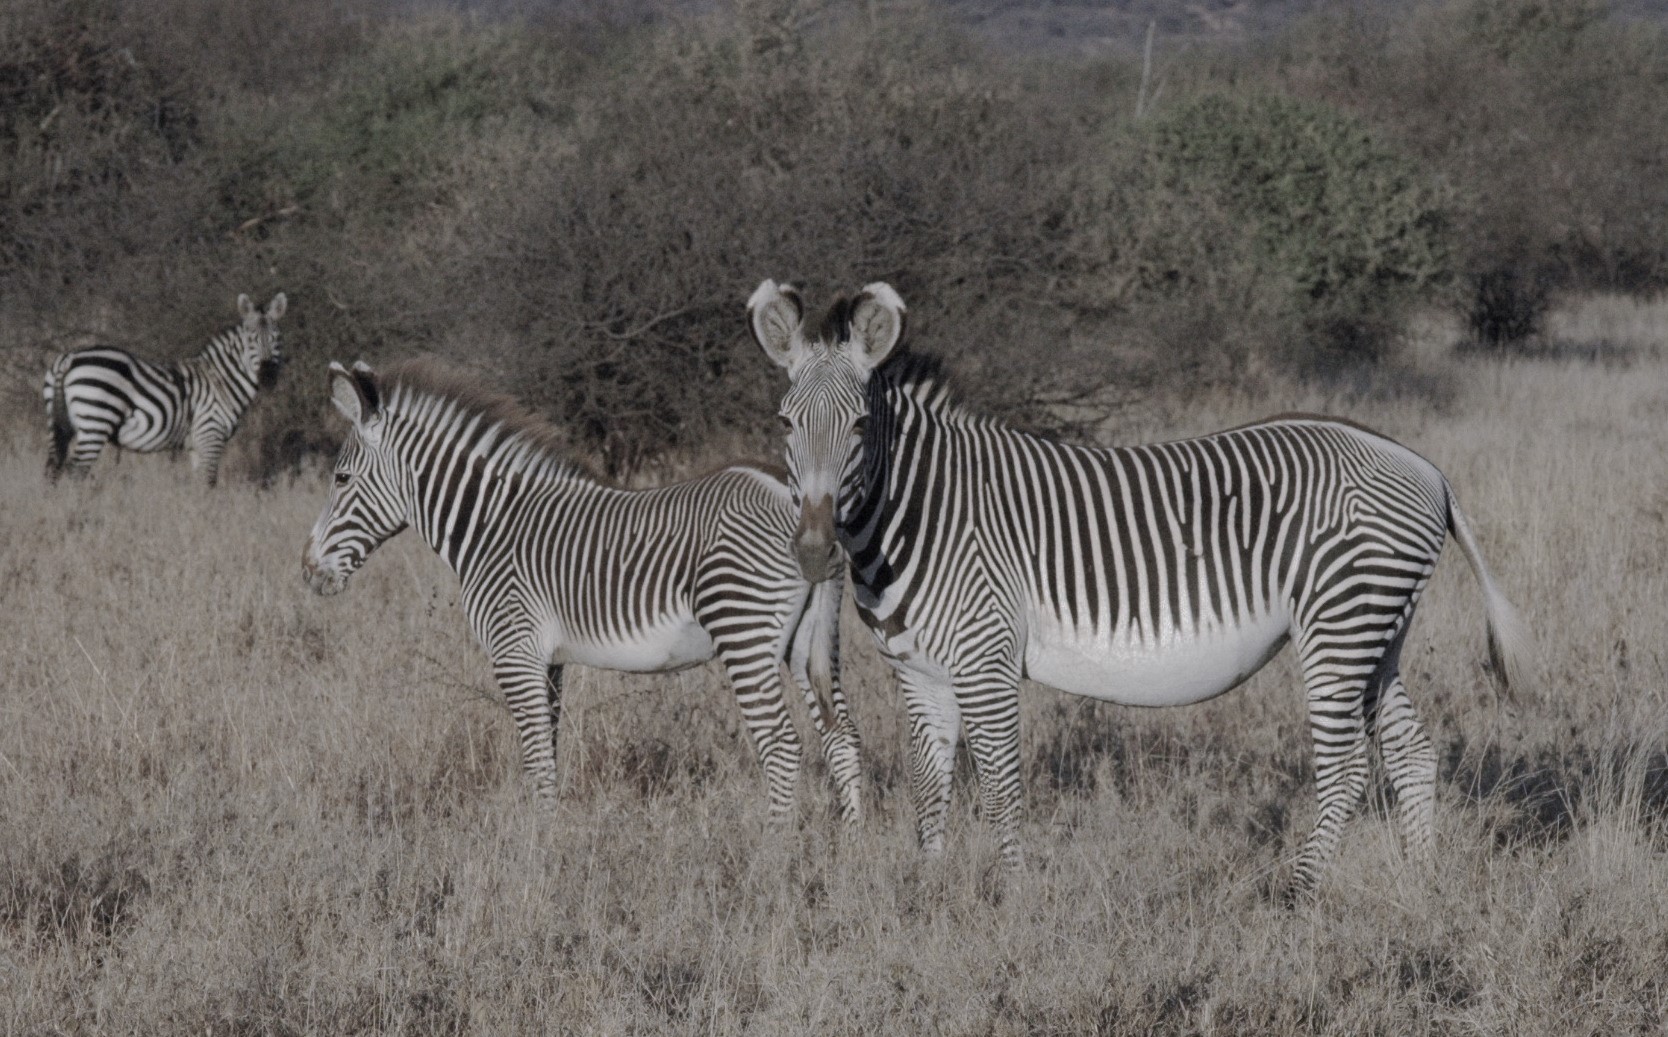 wo Grévy’s zebra stand in the foreground showing a much finer stripe pattern compared to a Plains zebra standing in the background.